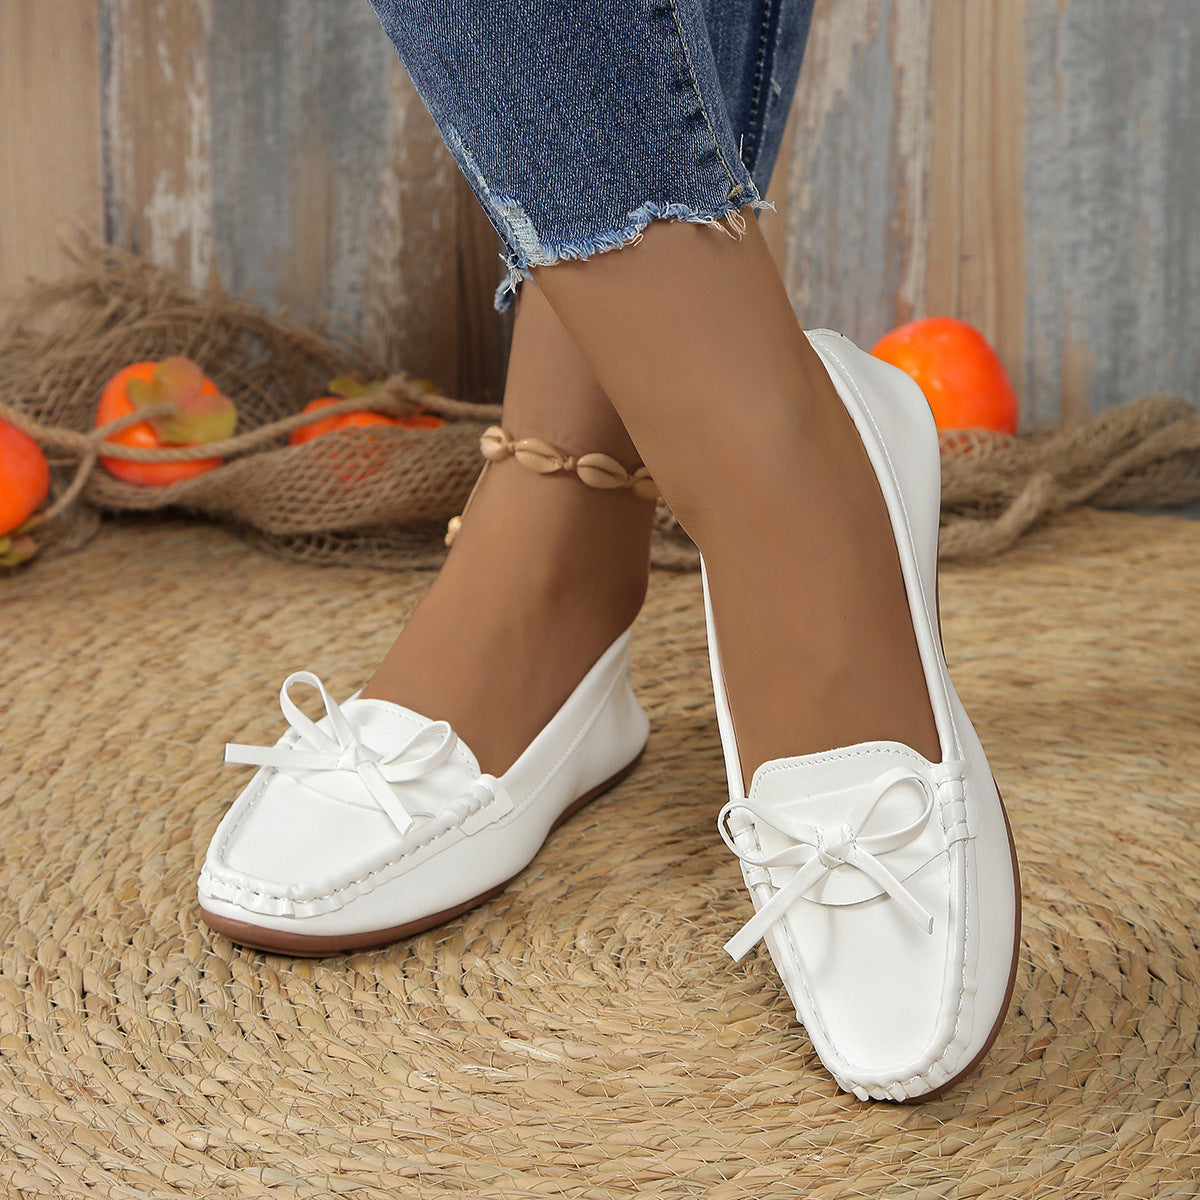 Casual Bowknot Flat Shoes Fashion Comfortable Soft-soled Loafers Slip-on Cozy Shoes Women